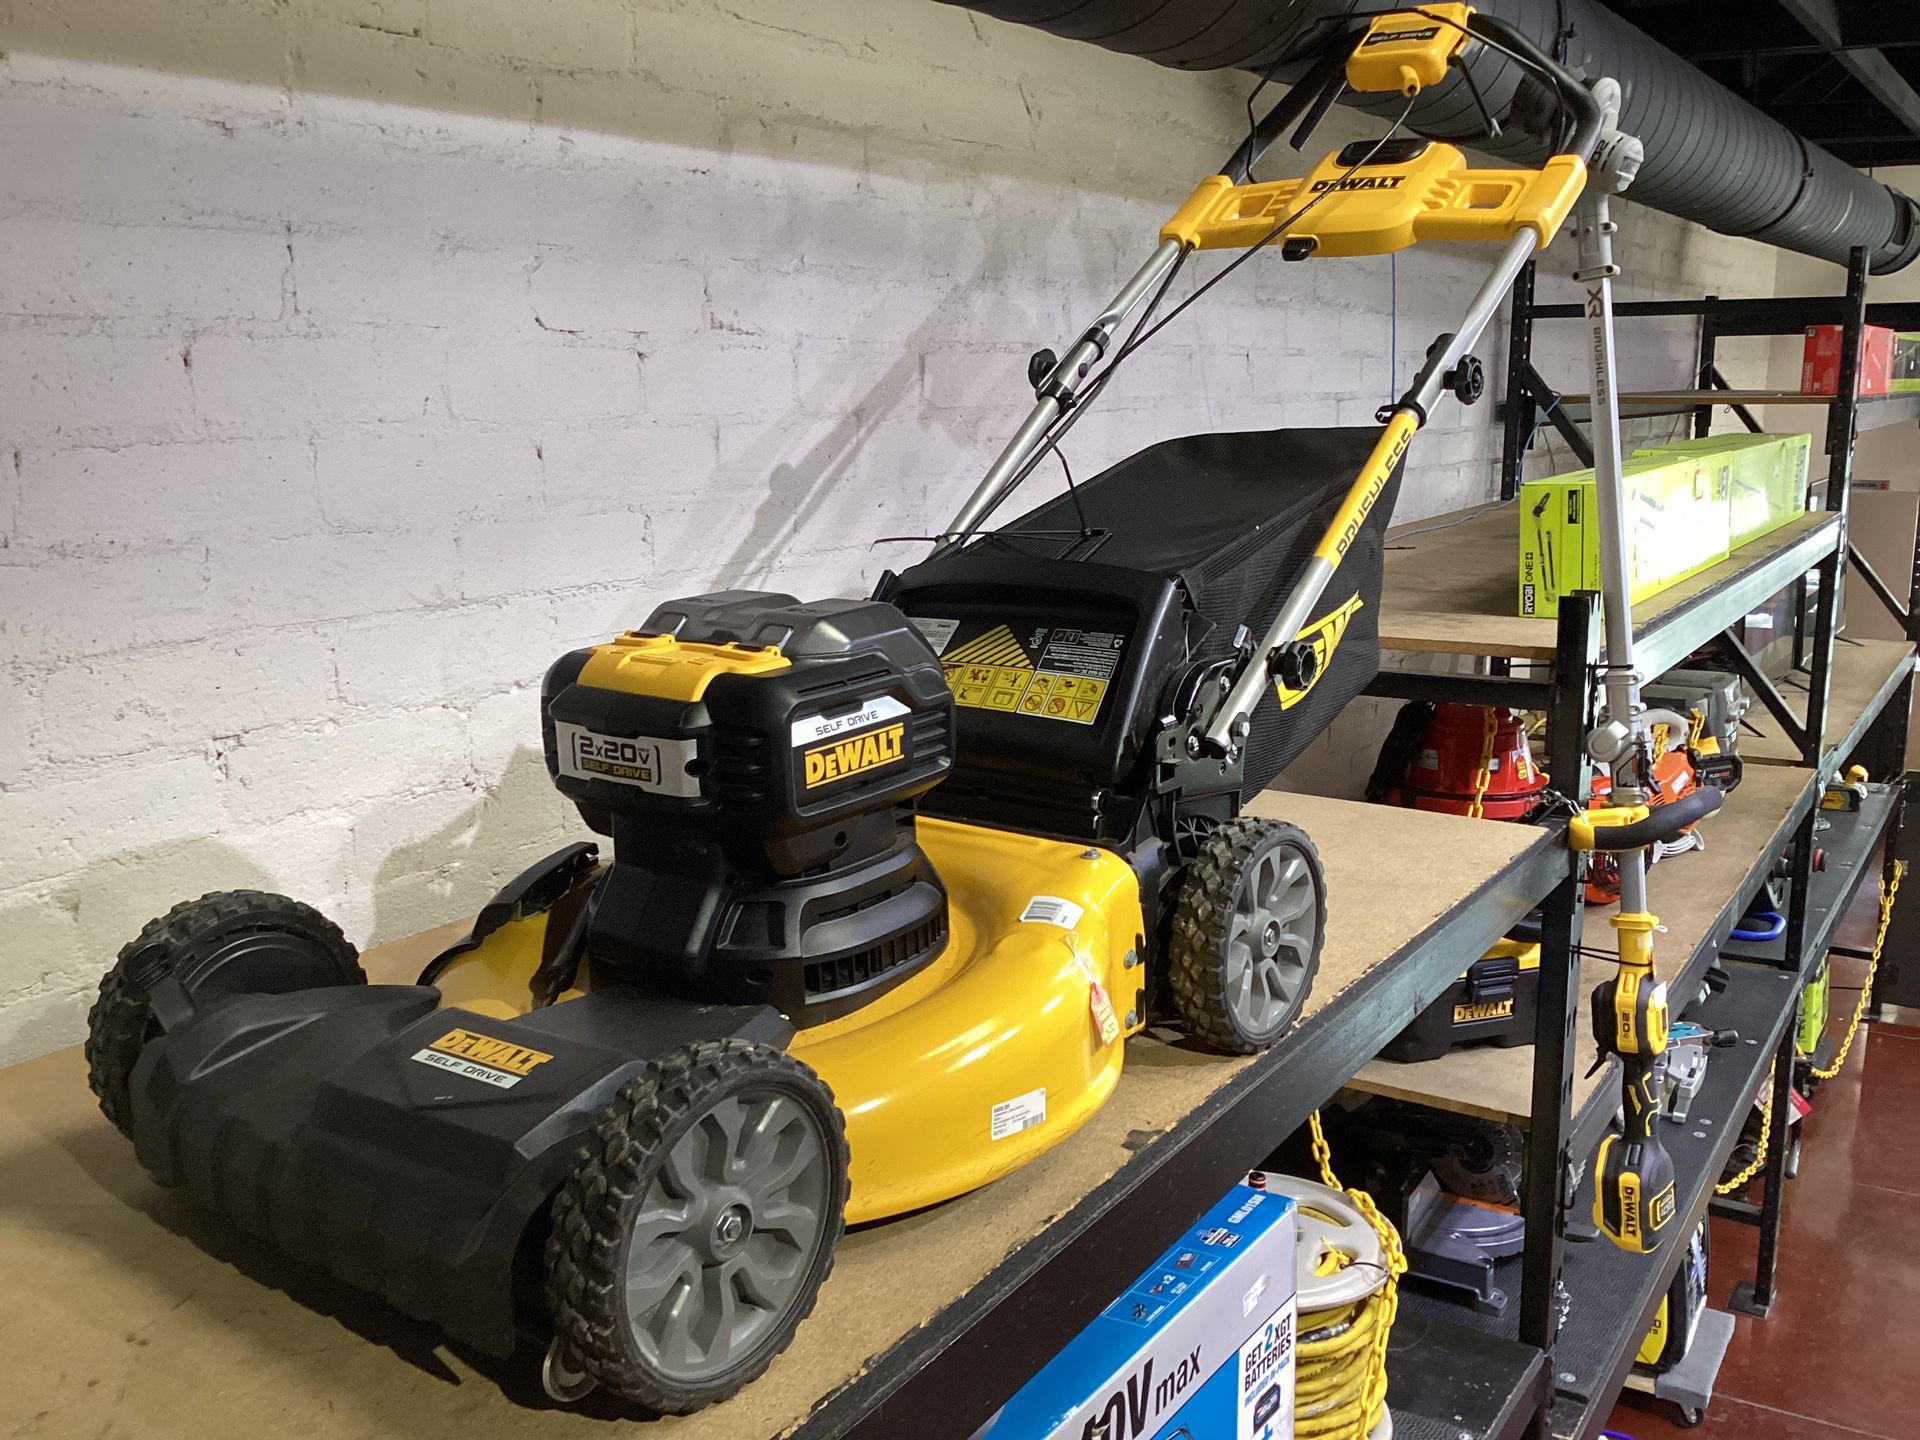 DEWALT DCMWSP244U2 2x20v MAX BRUSHLESS CORDLESS FWD SELF POWERED LAWN MOWER USED PRE OWNED (LOW OFFERS WILL BE IGNORED, I DO NOT ACCEPT OFFERS!!!)